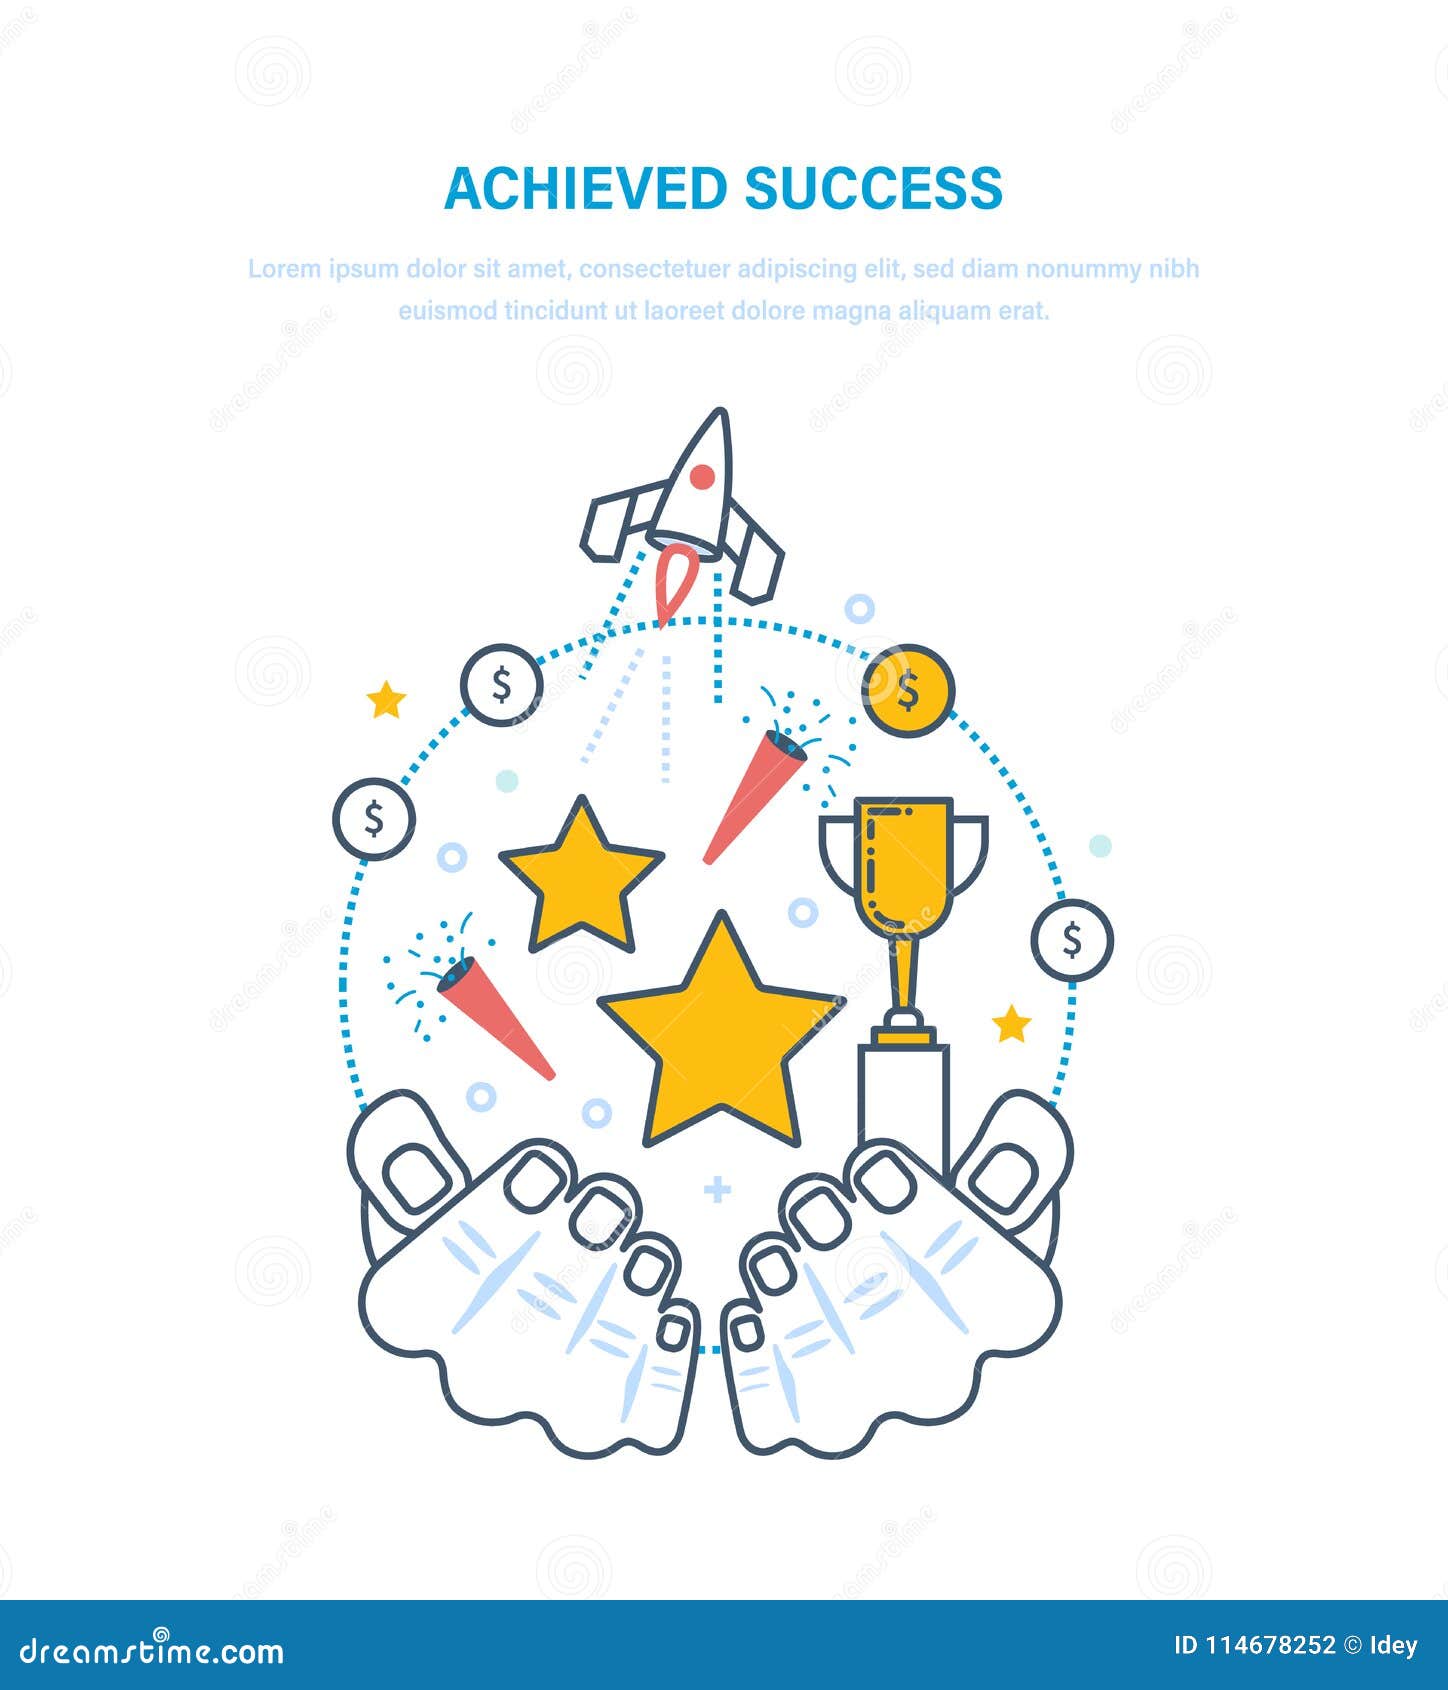 achieved success. sporting achievements, successful startup business projects, career growth.